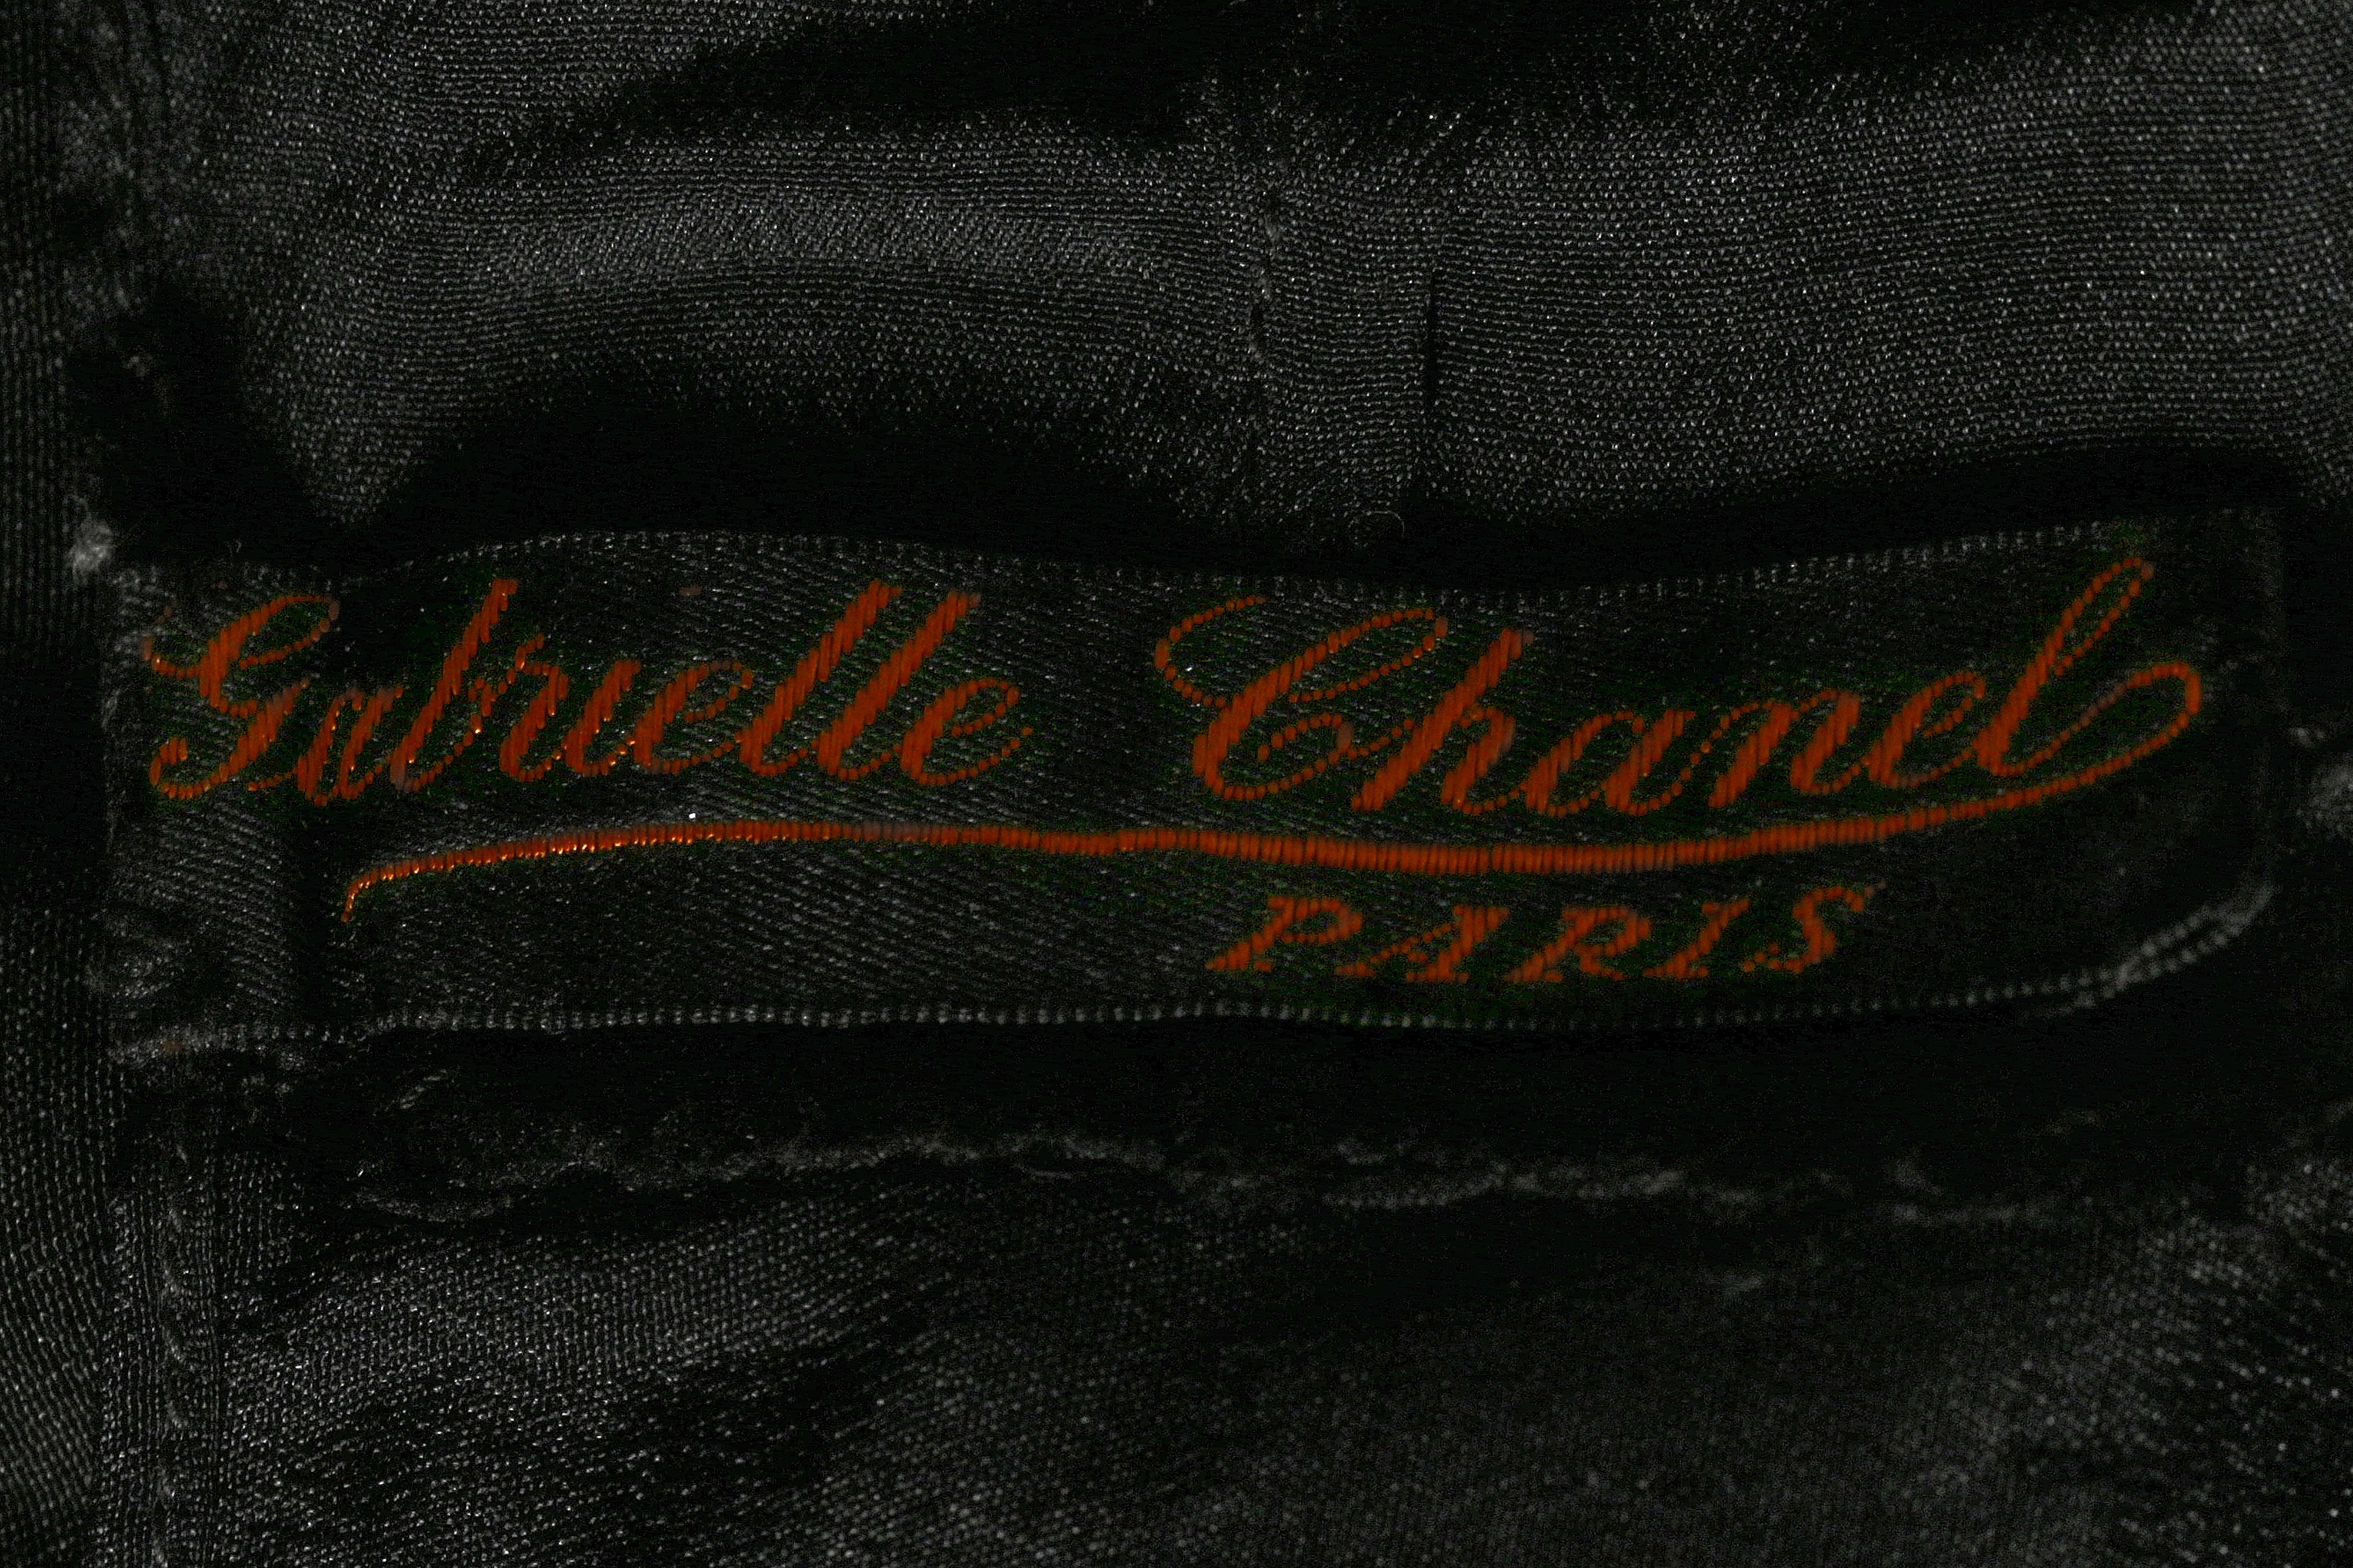 Lot 74 - A fine and early Gabrielle Chanel couture